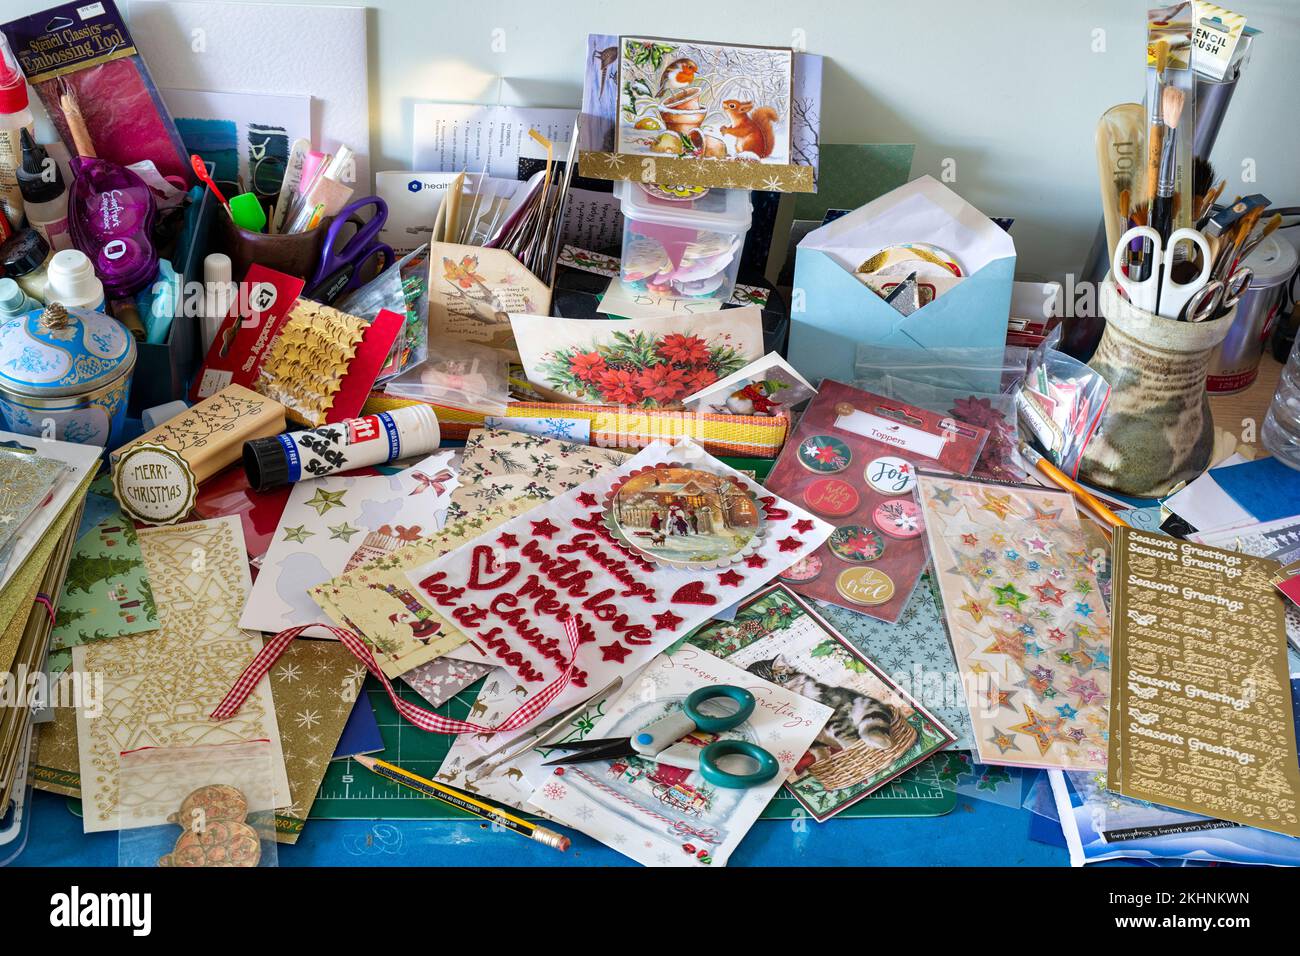 Messy Christmas card crafting table Stock Photo